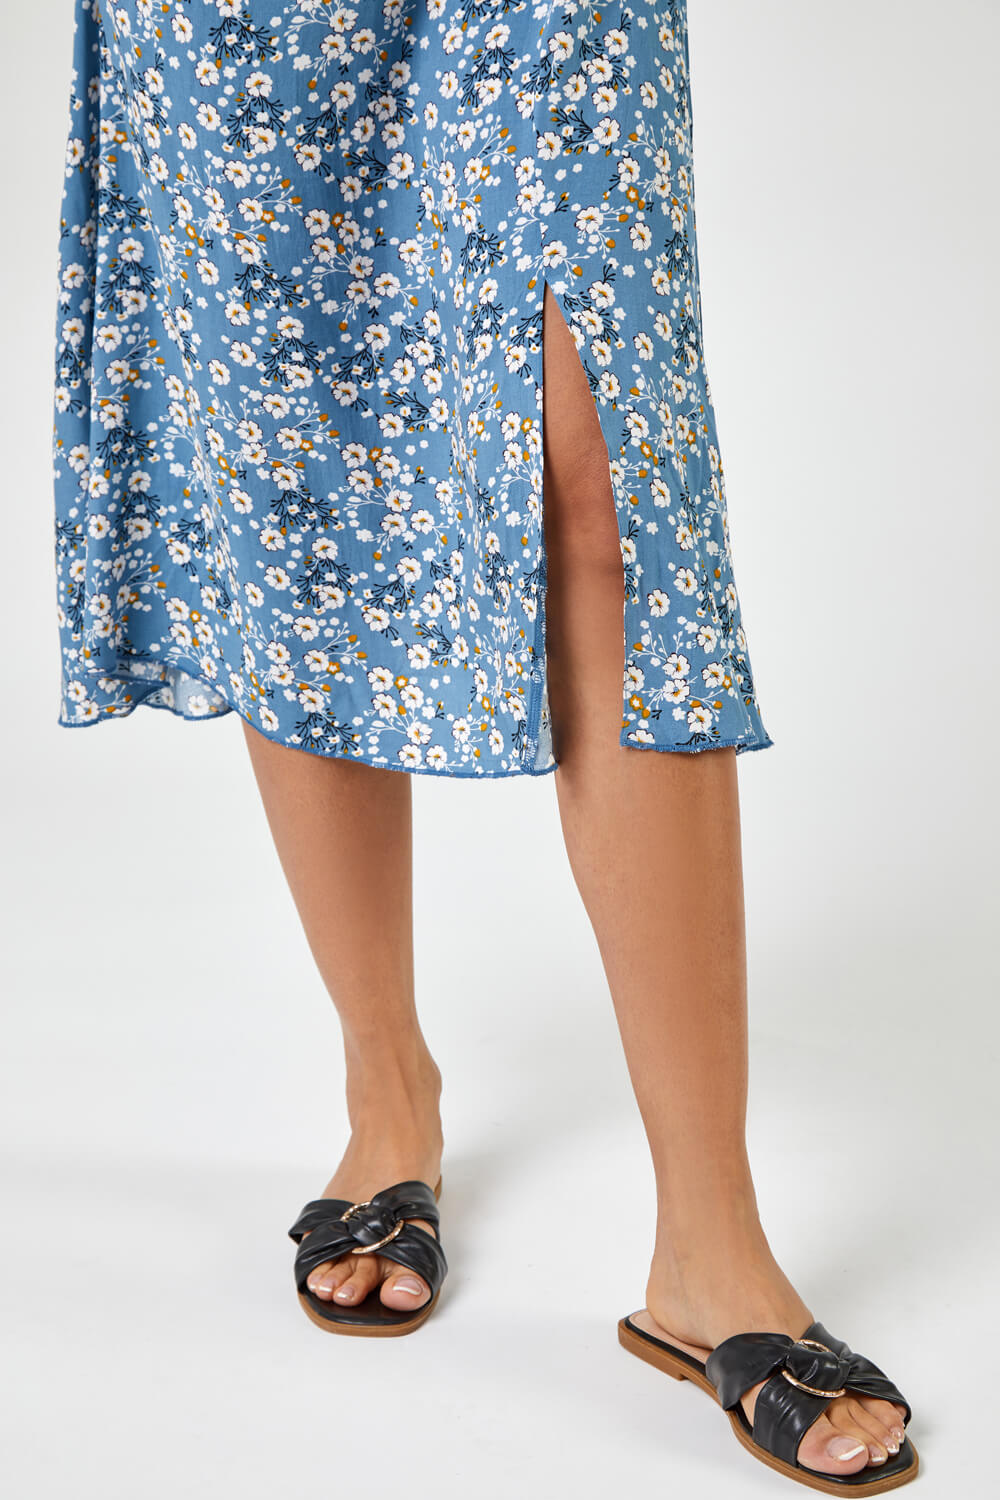 Blue Ditsy Floral Tie Neck Midi Dress, Image 5 of 5